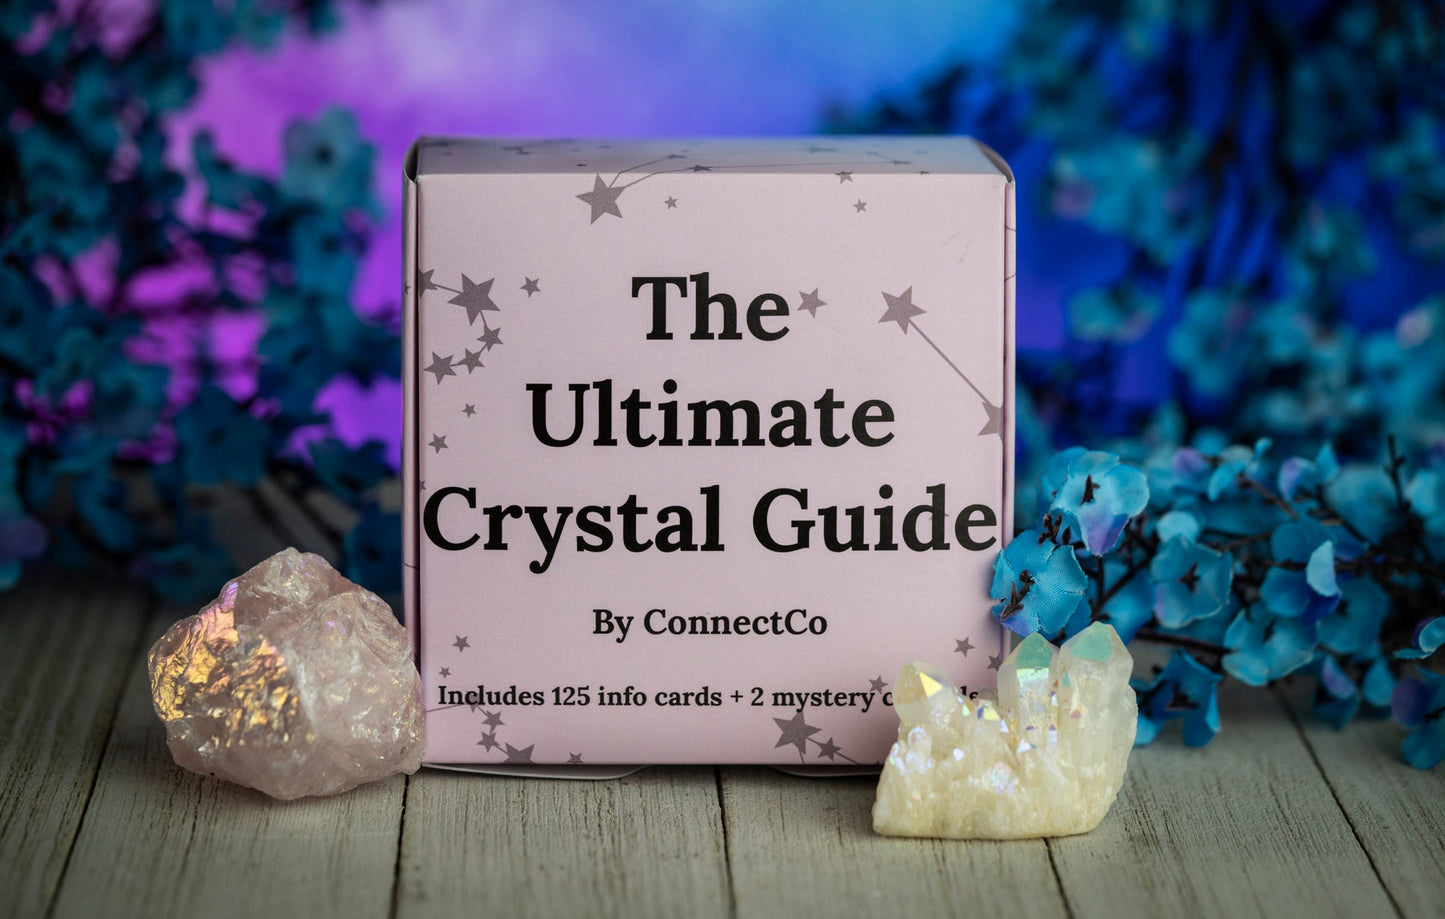 The Ultimate Crystal Guide, Learn About Crystals, Mystery Crystals, Info Cards